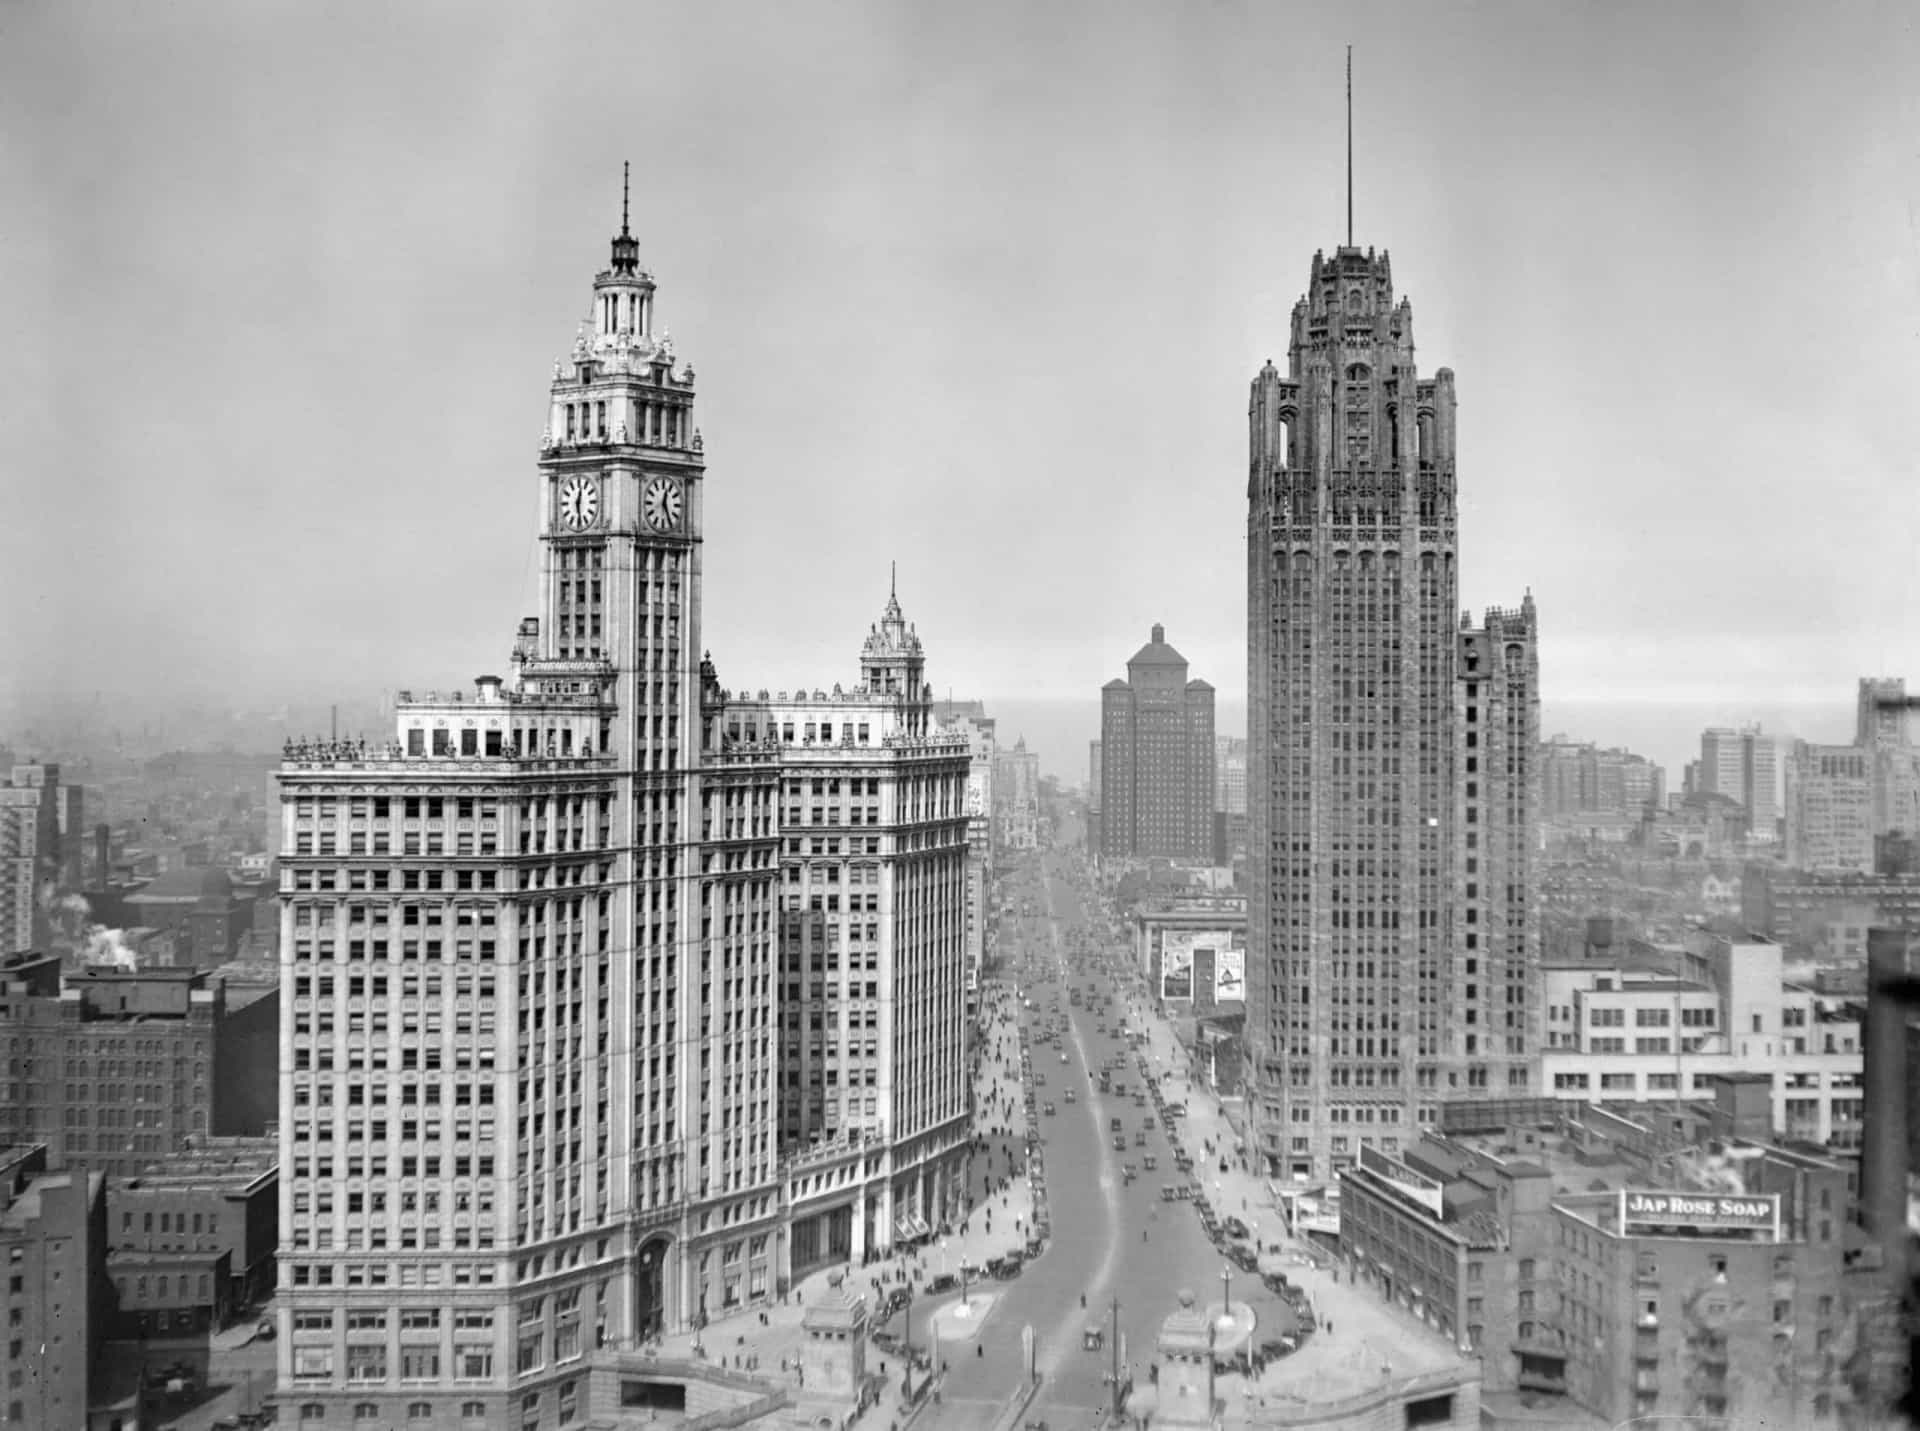 <p>In 1919, Capone left New York City for Chicago at the invitation of Johnny Torrio. Capone eventually became Torrio's right-hand man as the older mobster established a bootlegger's empire in the city that was eventually controlled by Al Capone himself. Pictured is Chicago's Michigan Avenue in 1925.</p>